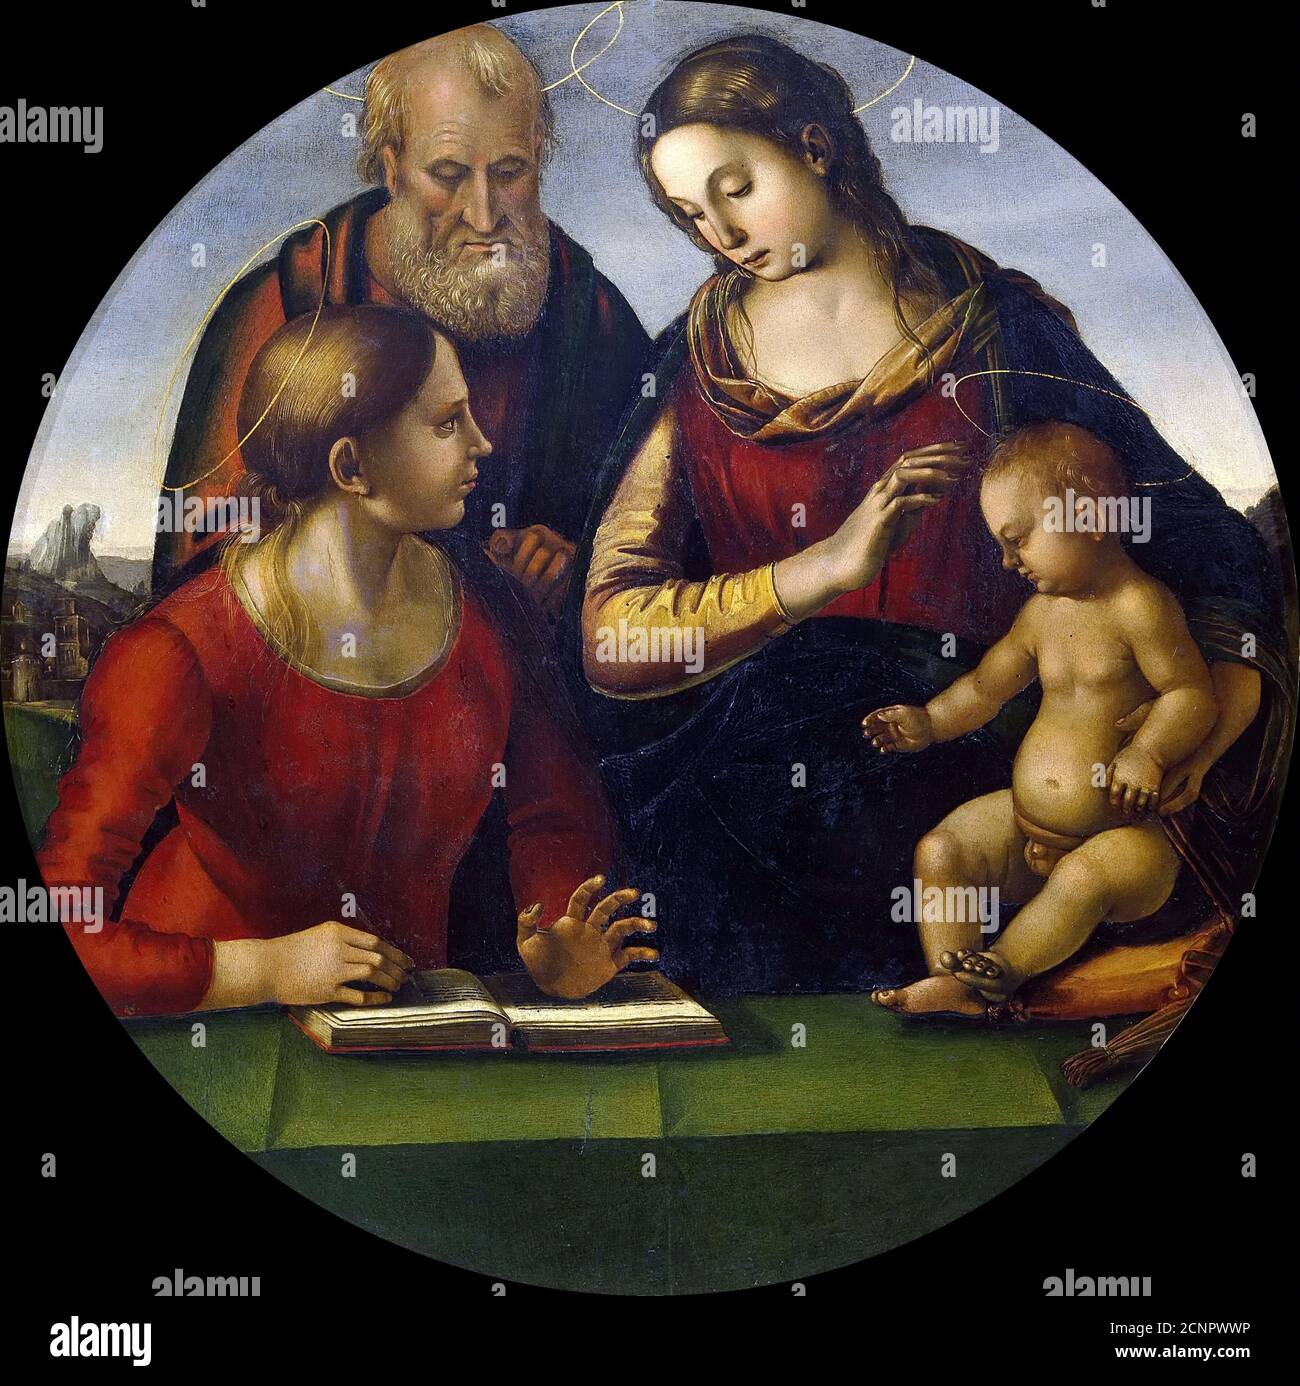 The Holy Family with Saint, c.1490-1495. Found in the collection of Galleria Palatina, Florence. Stock Photo